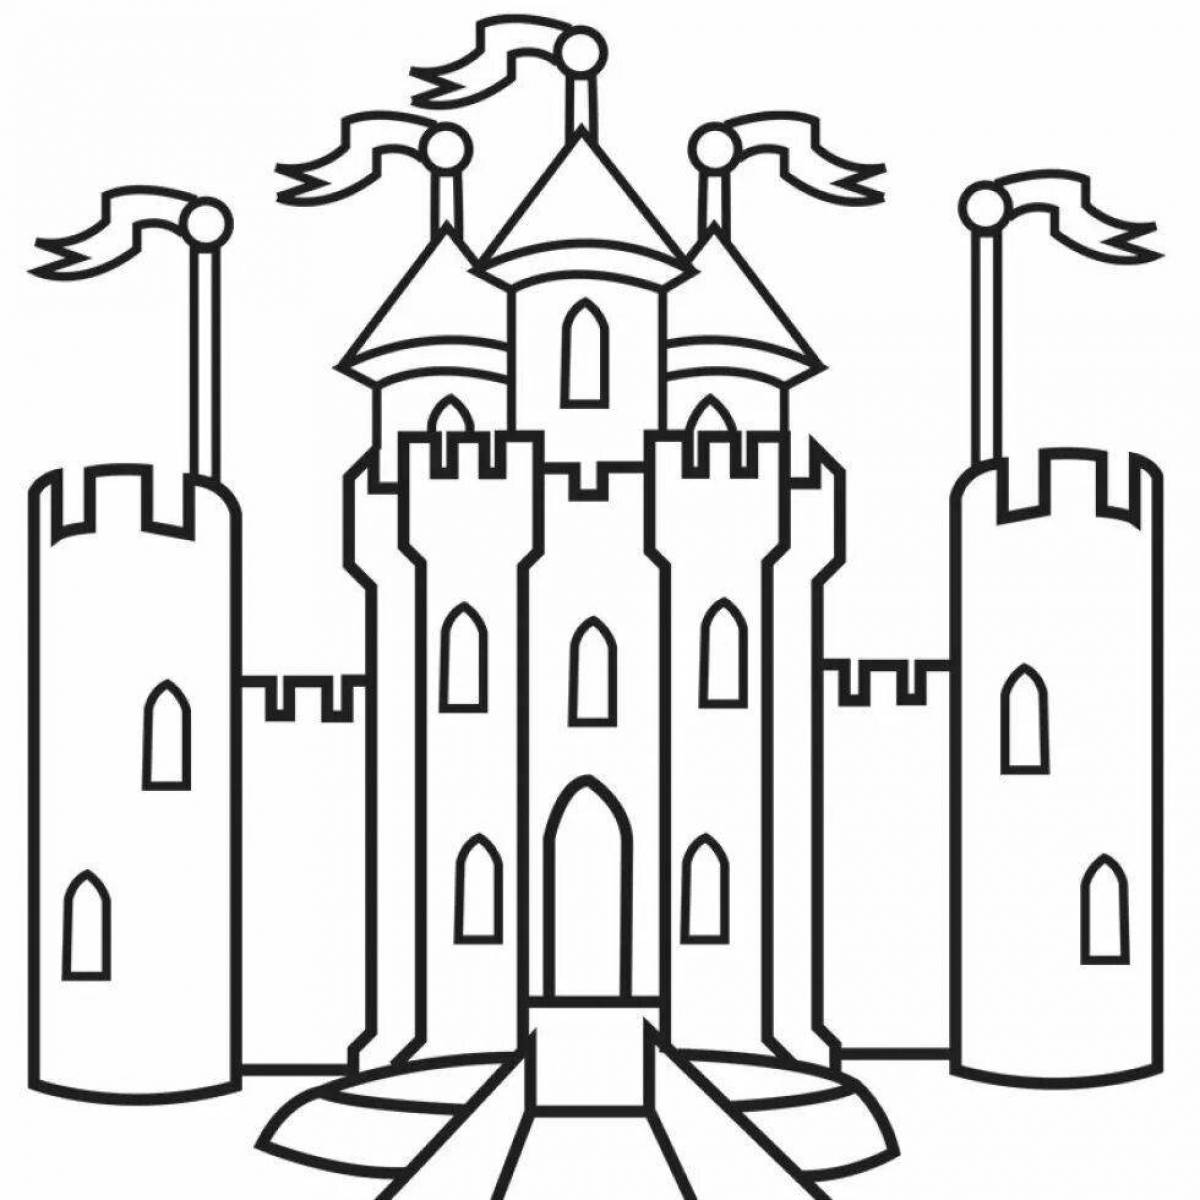 Shining palace coloring book for kids